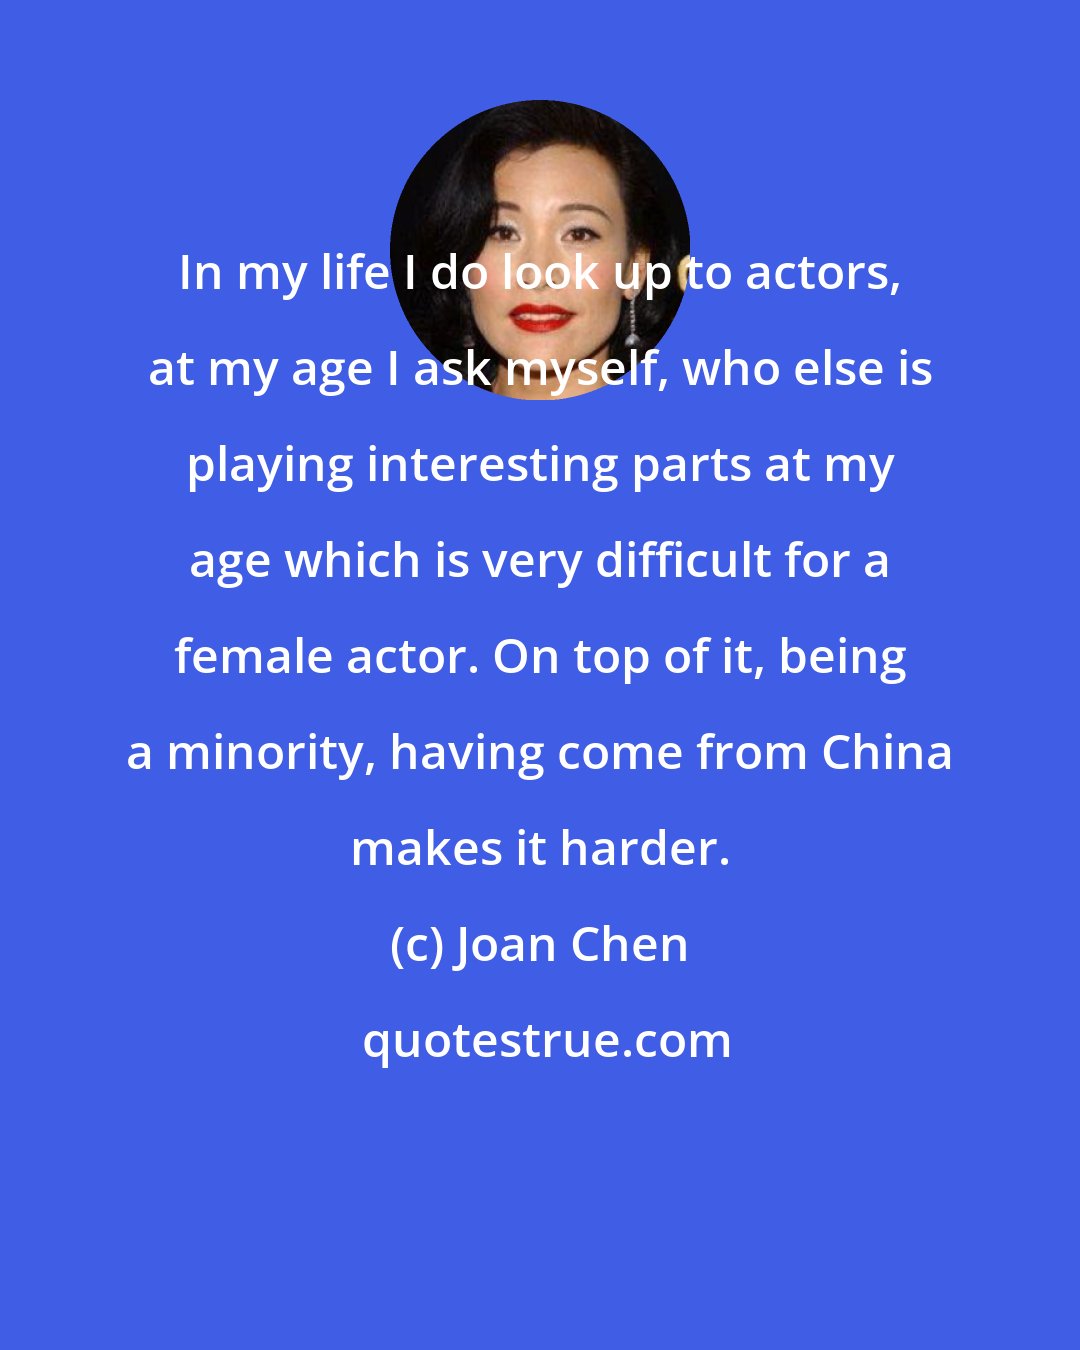 Joan Chen: In my life I do look up to actors, at my age I ask myself, who else is playing interesting parts at my age which is very difficult for a female actor. On top of it, being a minority, having come from China makes it harder.